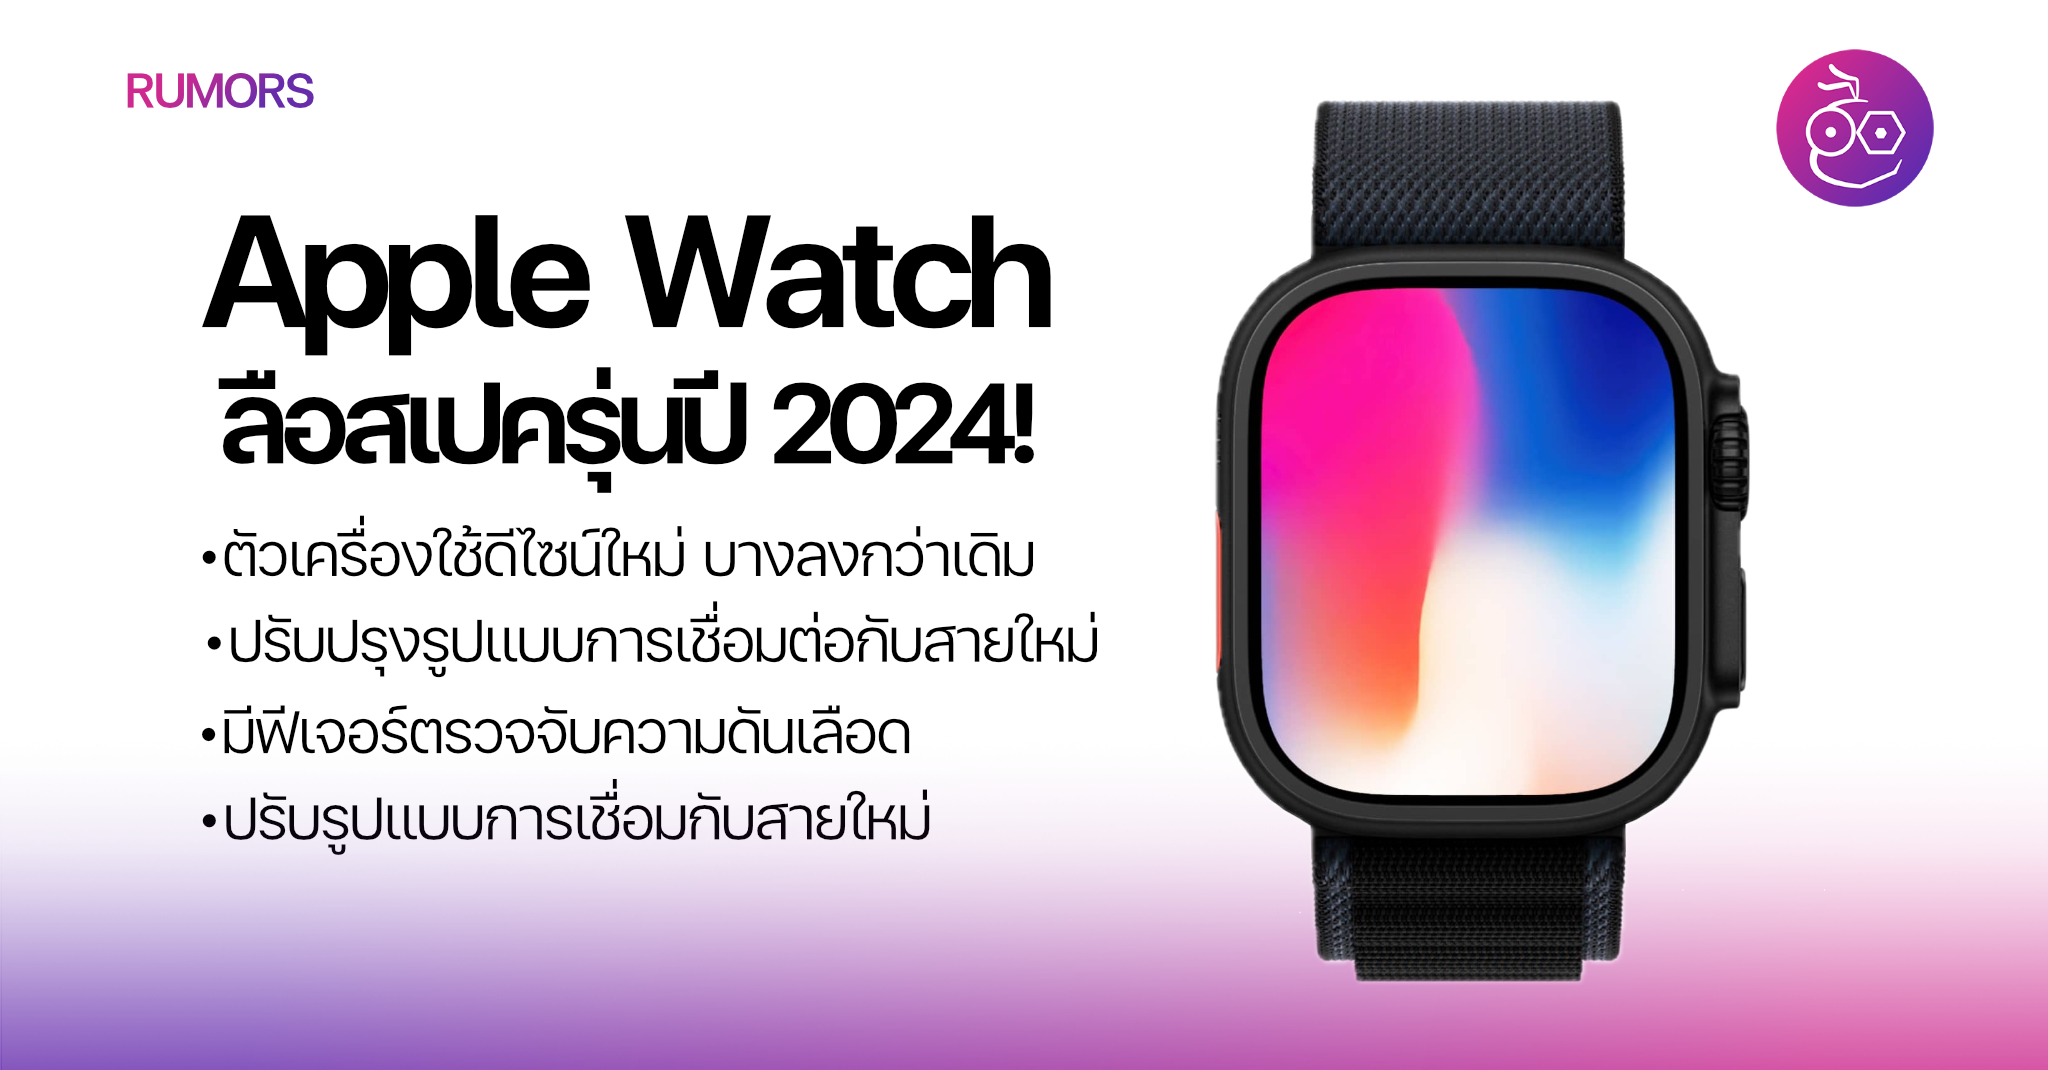 Exciting Rumors for the 2024 Apple Watch New Specs and 10th